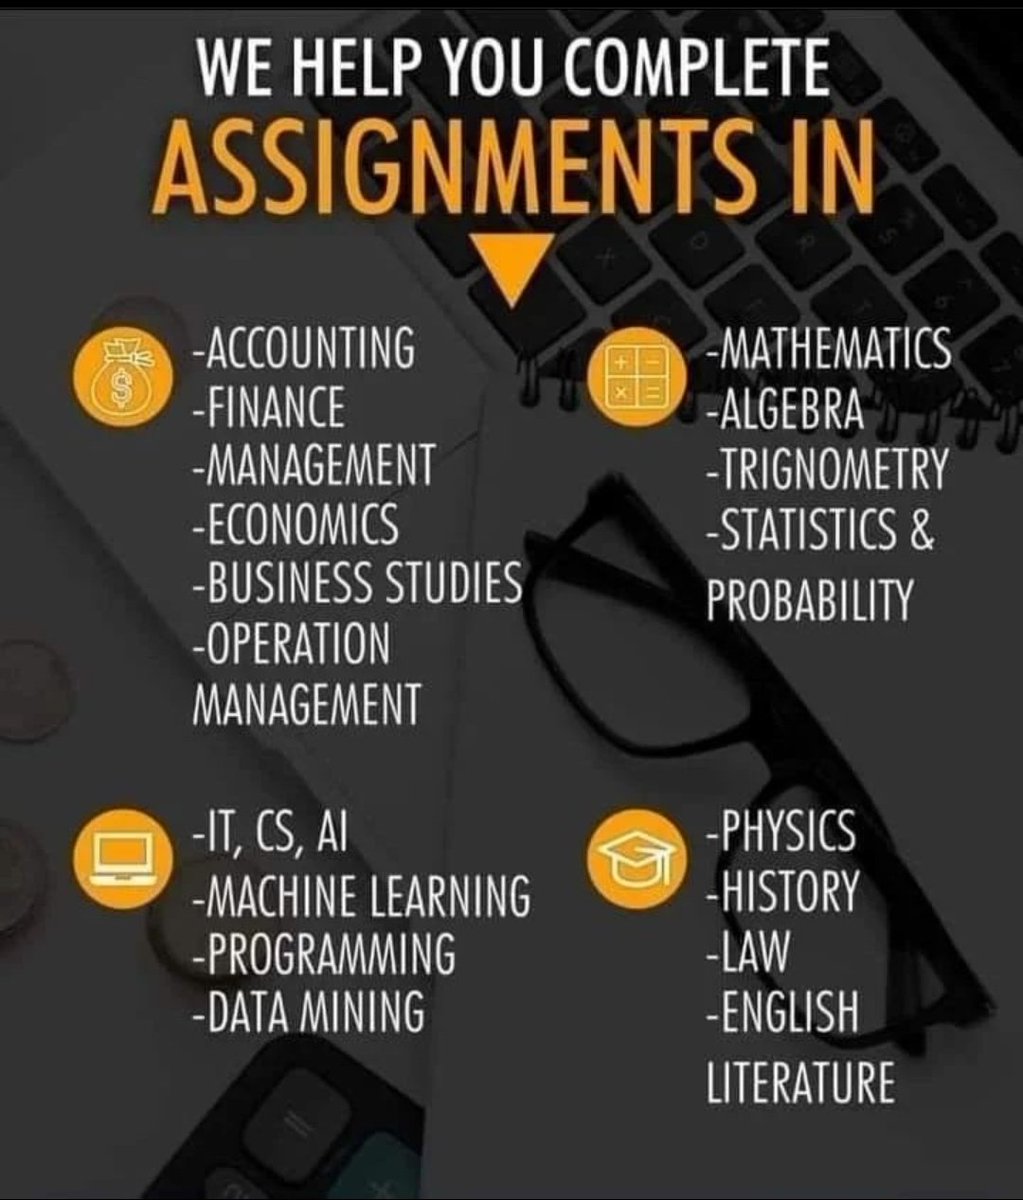 HMU and Hire us to do your Math Assignments Calculus Psychology Art Nursing #Music Philosophy Economics Law Sociology Literature SPSS History Chemistry Business Anatomy Languages Essays Dissertation Theology Click on our Bio